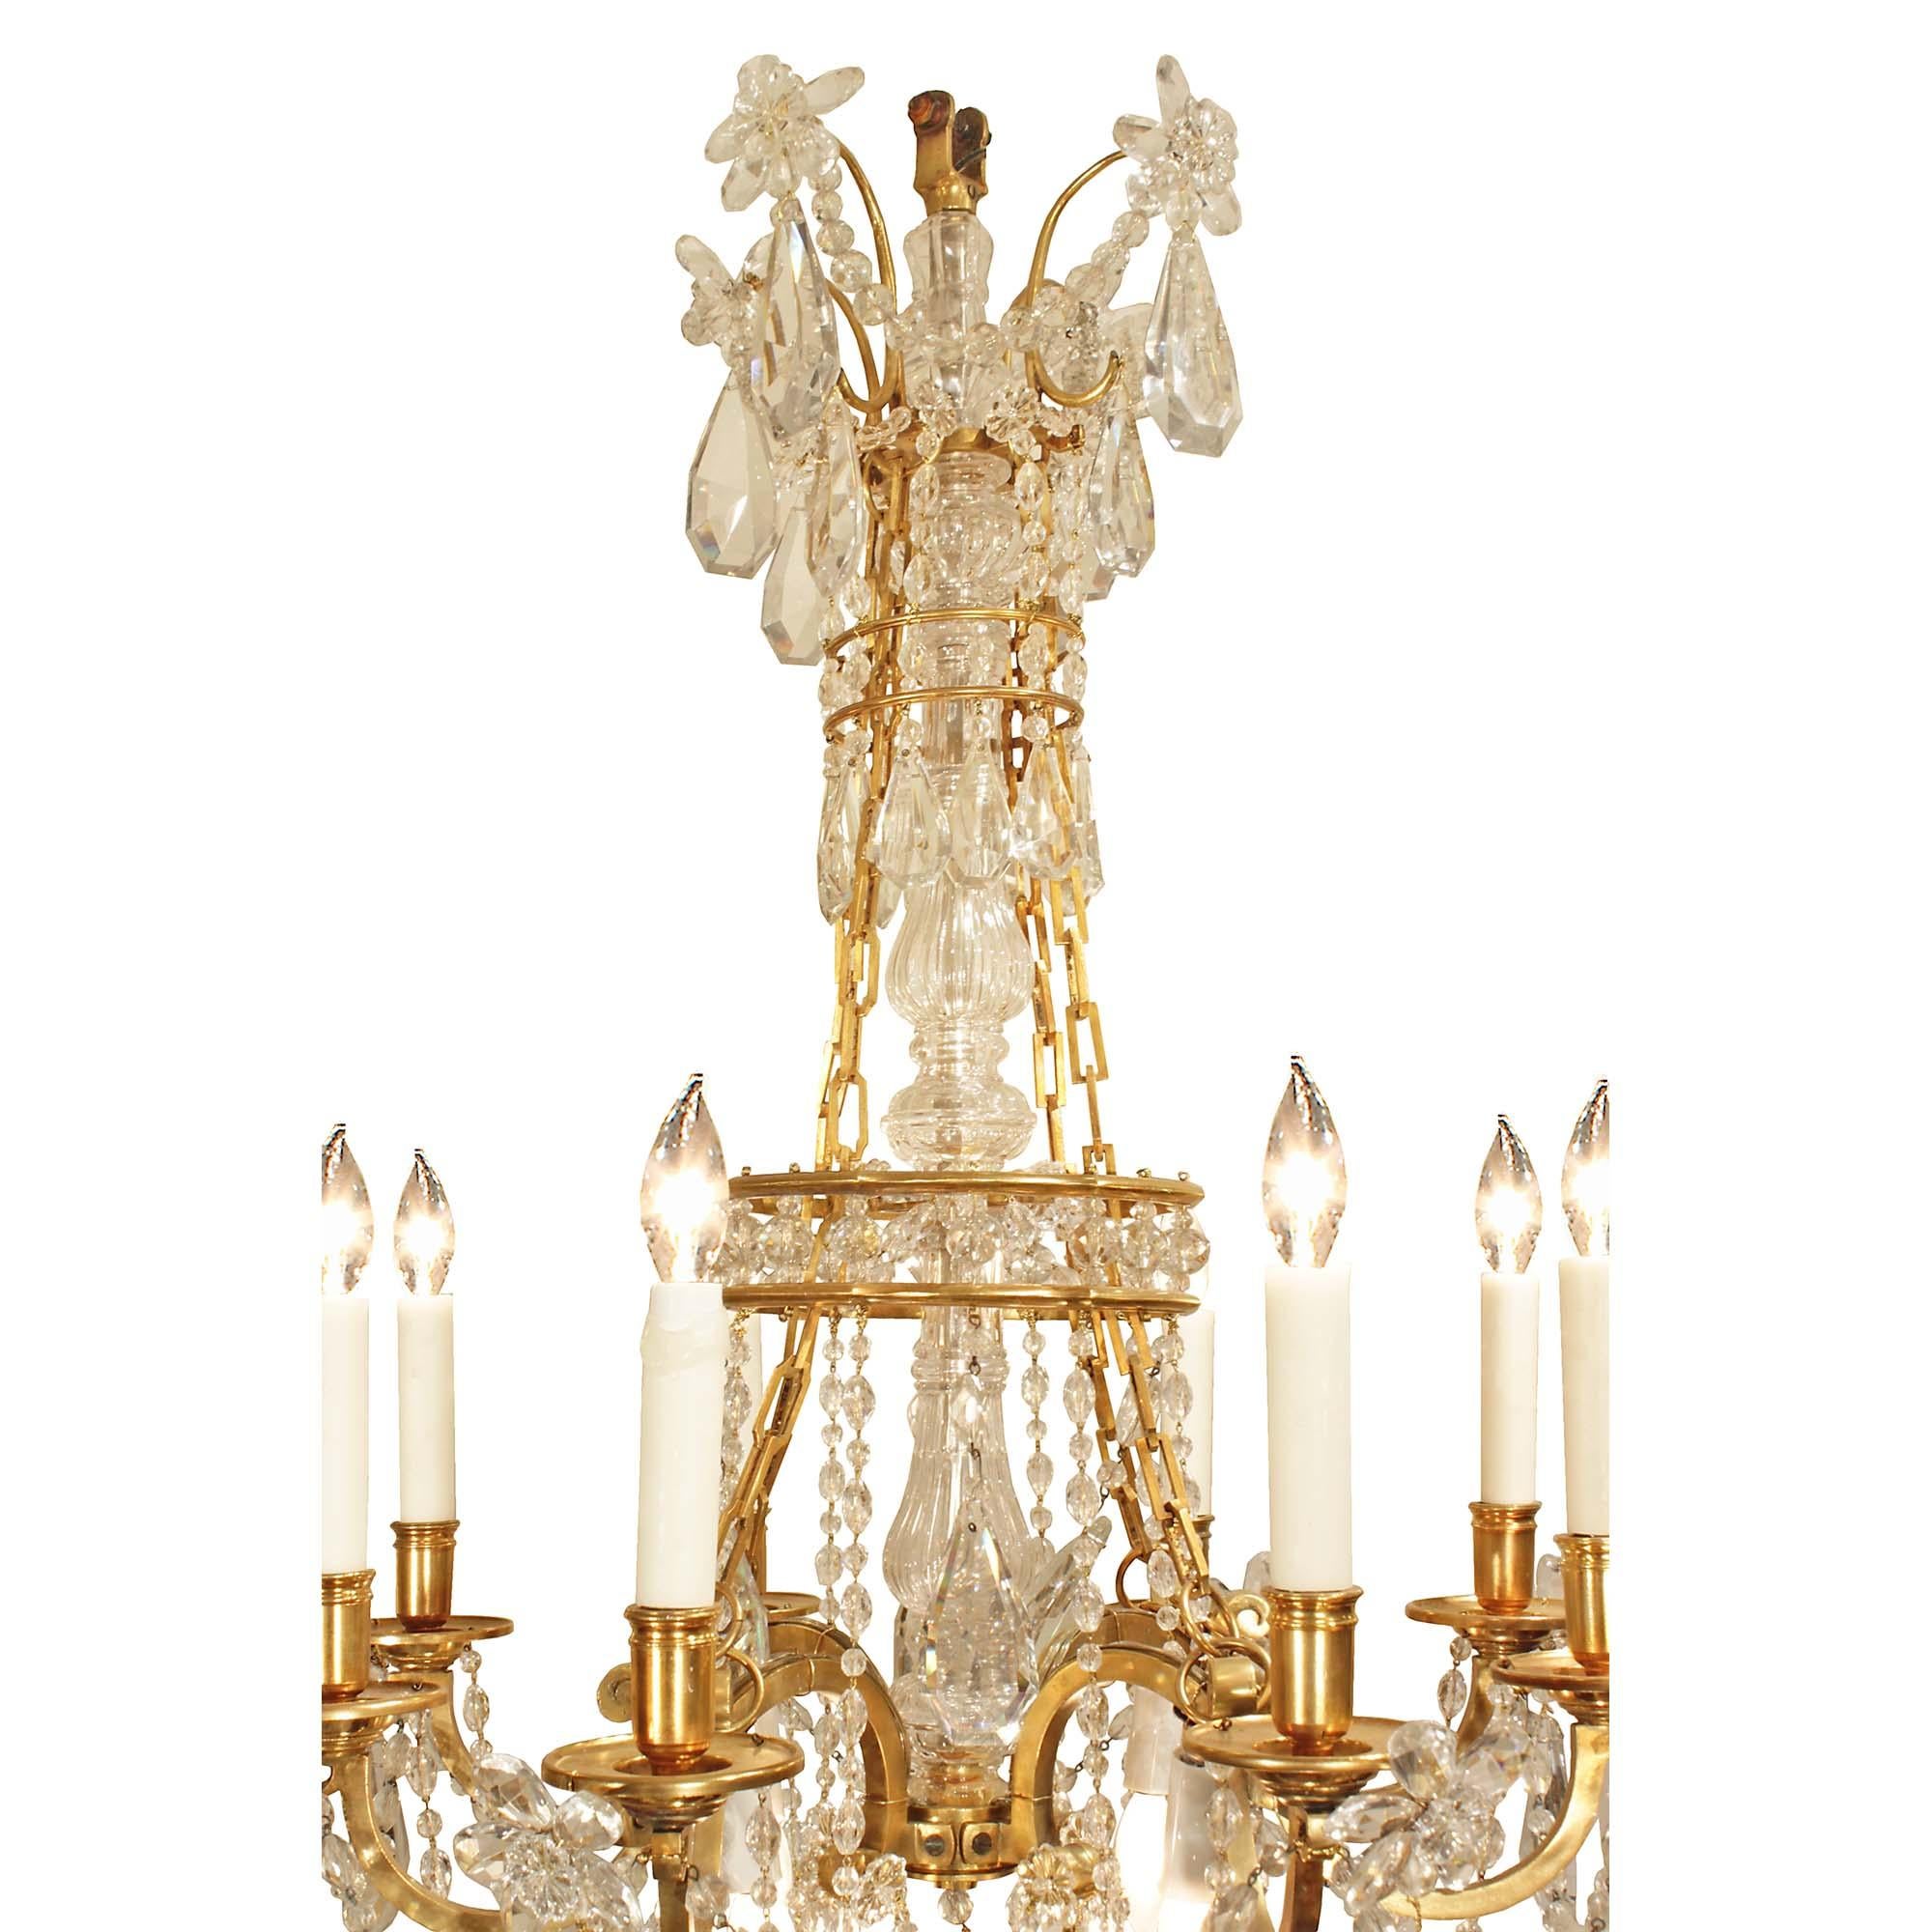 An extremely high quality French early 19th century Louis XVI st. ormolu and Baccarat crystal Marie Antoinette chandelier. Each main scrolled arm branches off in two, for a total of eight lights. The arms are decorated with large kite shaped and